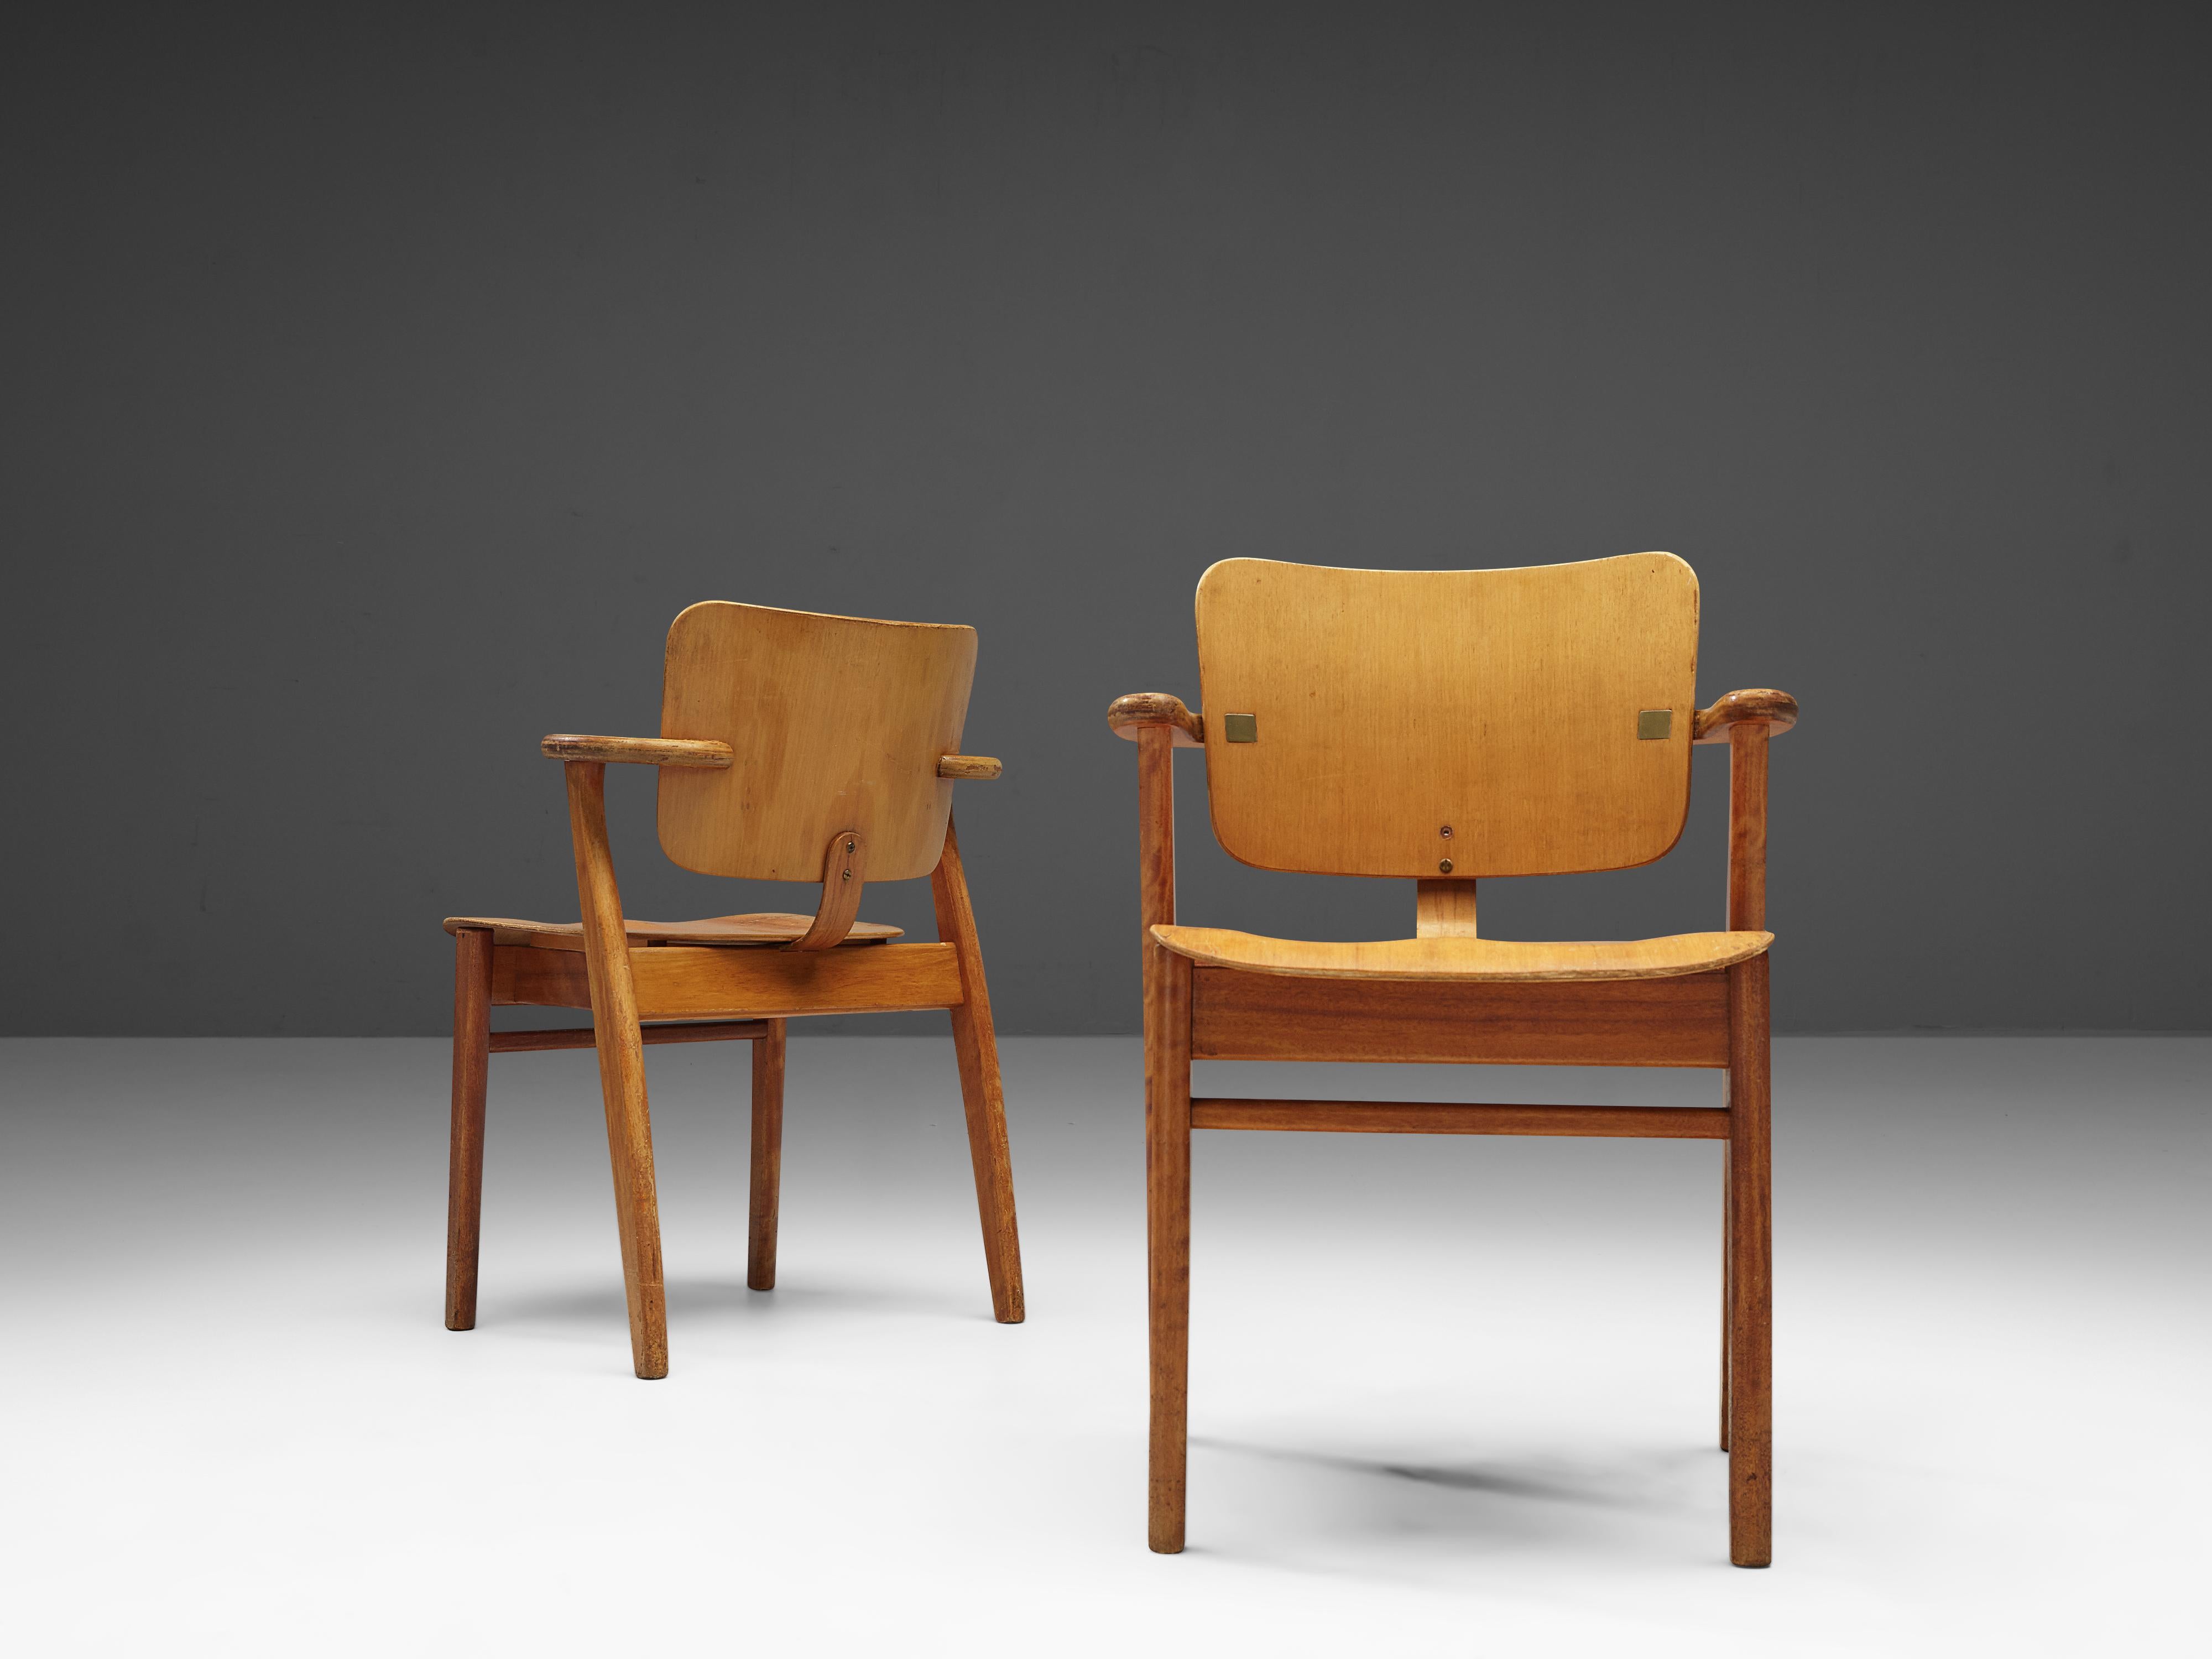 Ilmari Tapiovaara, 'Domus' armchairs, birch, metal, Finland, design 1953

This is a wonderful pair of early ‘Domus’ armchairs by Finnish designer Ilmari Tapiovaara. The frame is made from solid birch. Back and seating from laminated plywood. This